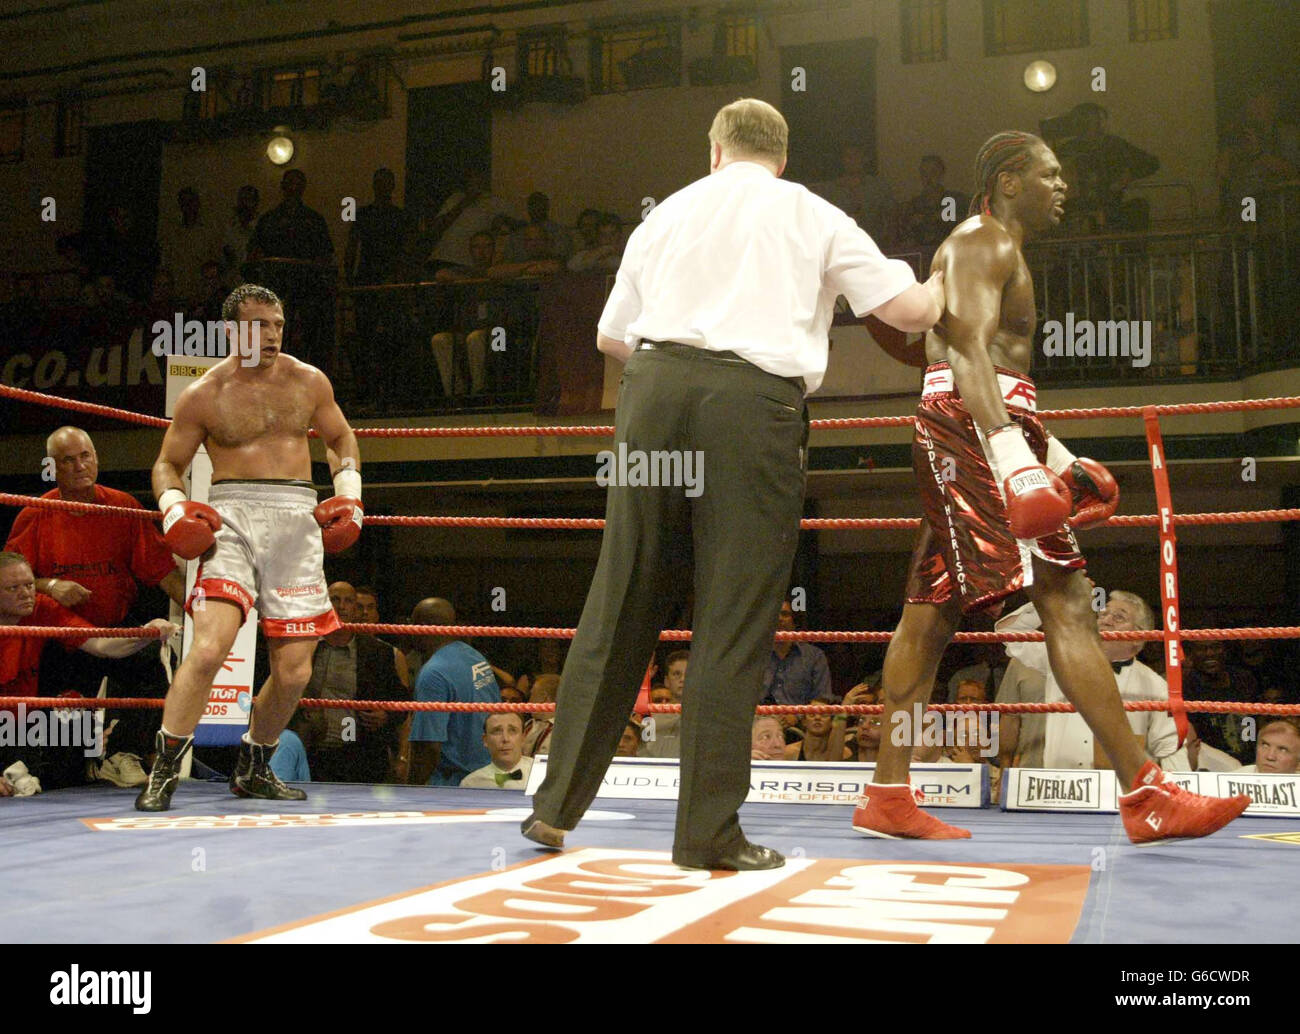 Audley Harrison (right) stops Matthew Ellis after 3rd knockdown, during their heavyweight contest at London's Bethnal Green venue. Harrison overcome Ellis after one minute 35 seconds of round two. Stock Photo